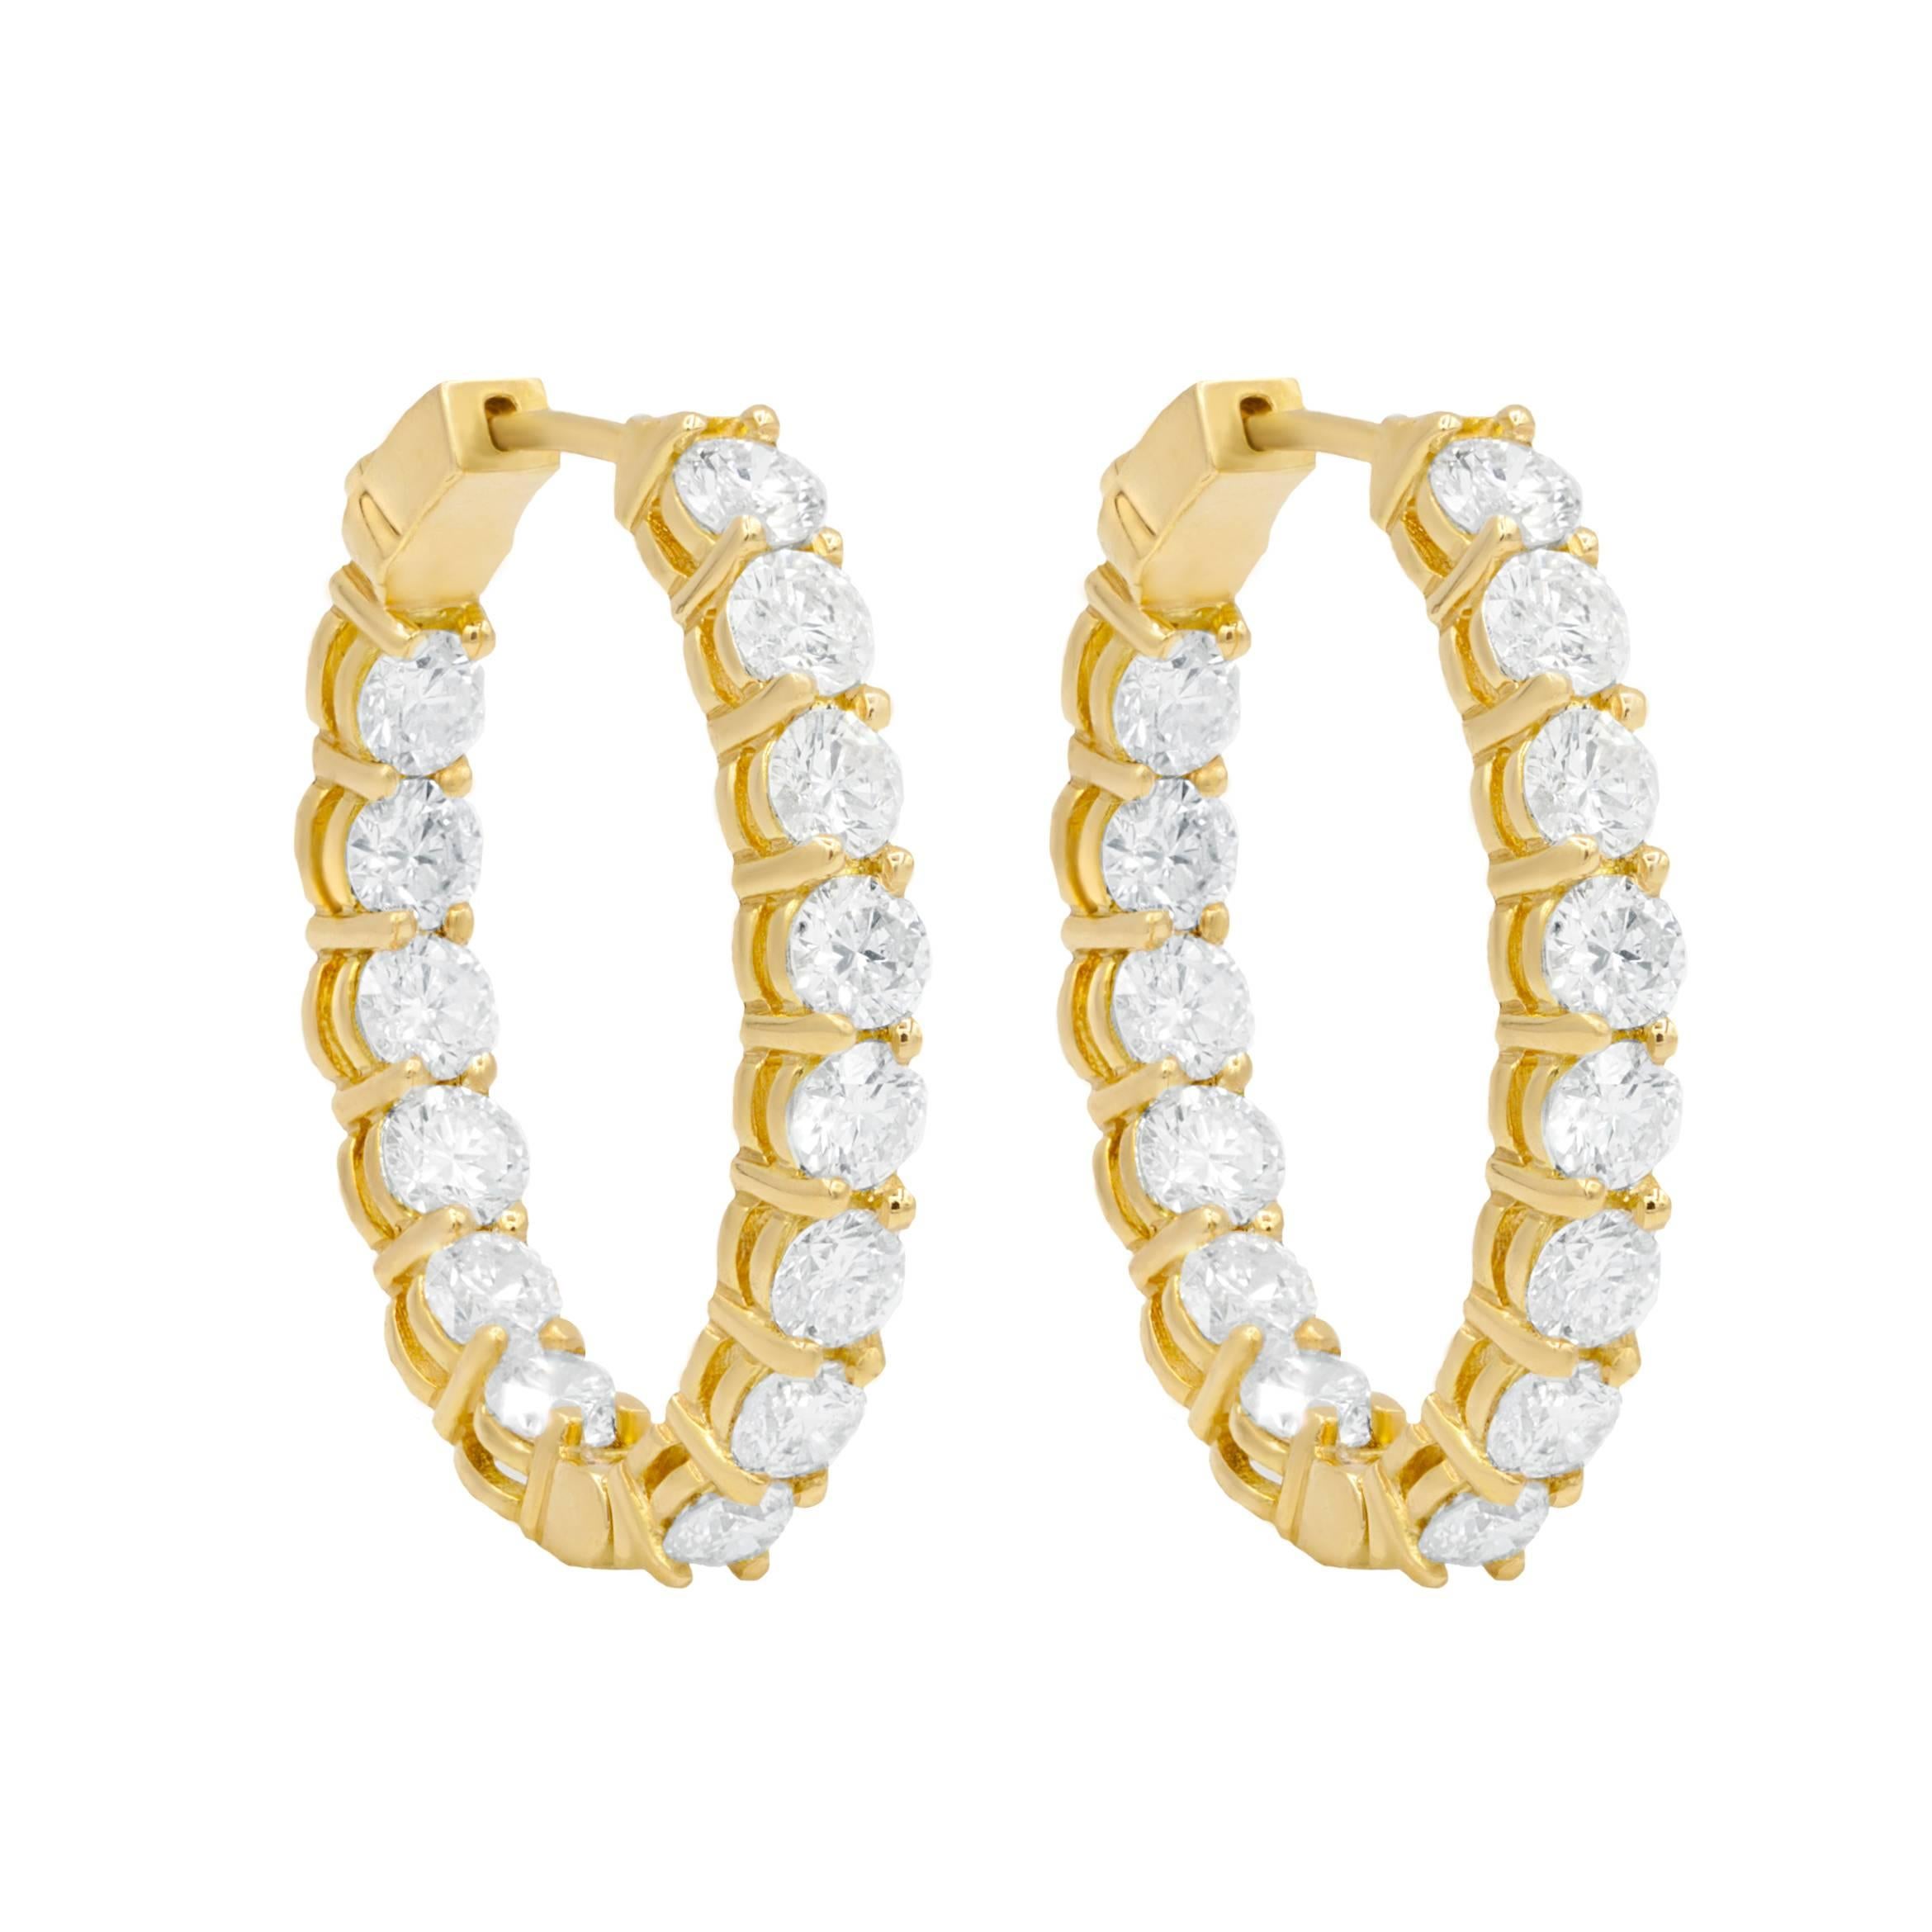 Absolutely stunning yellow gold diamond hoop earrings, features 6.60 carats of diamonds, each stone is approximately 0.25 carats. Total amount of round brilliant cut diamonds is (26 stones).  
The average color and clarity F-G SI 
Diameter: 1 1/2